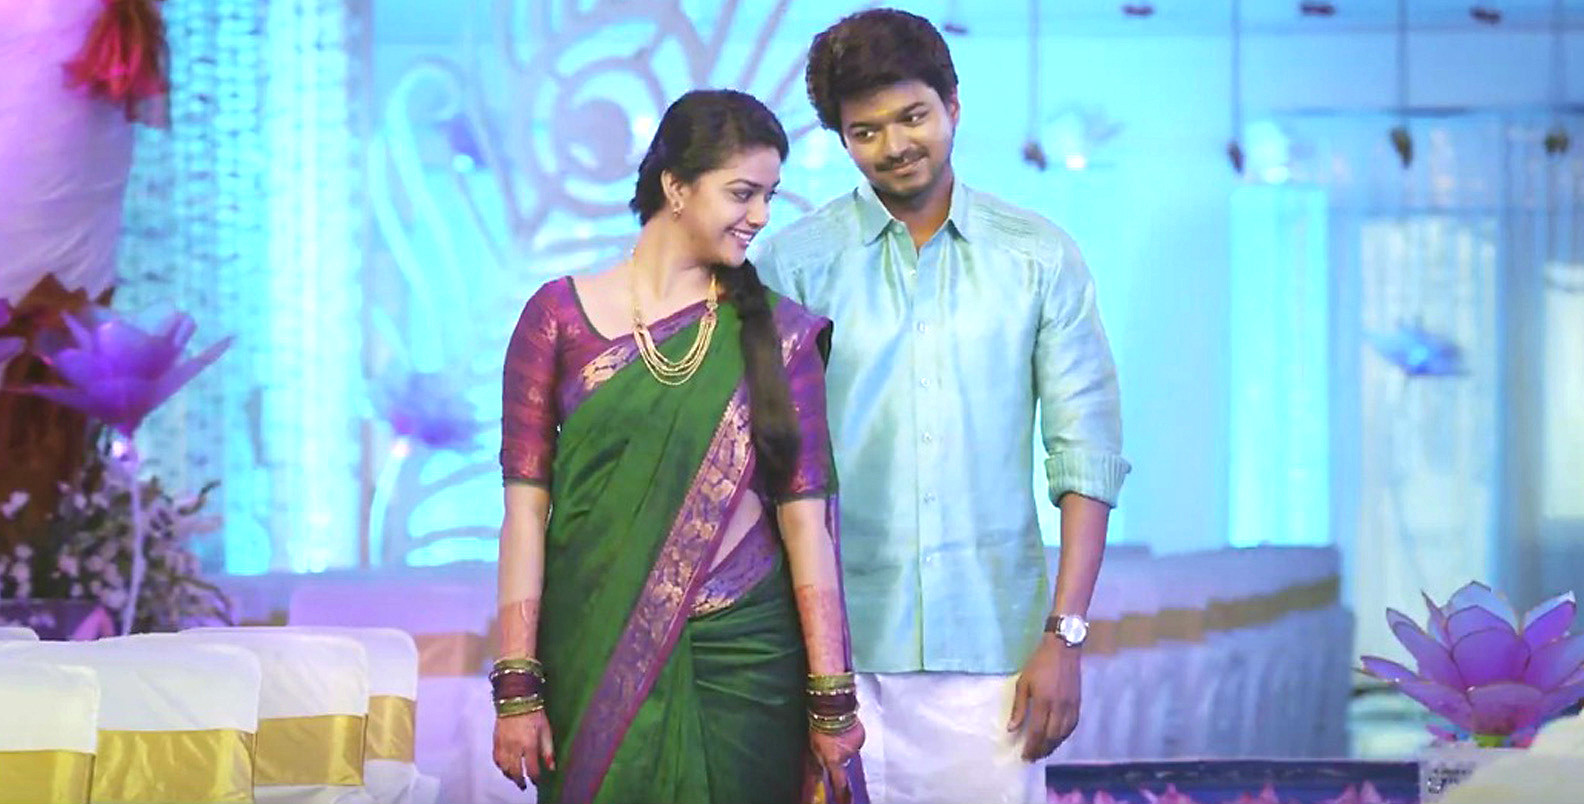 movie review: Bairavaa review